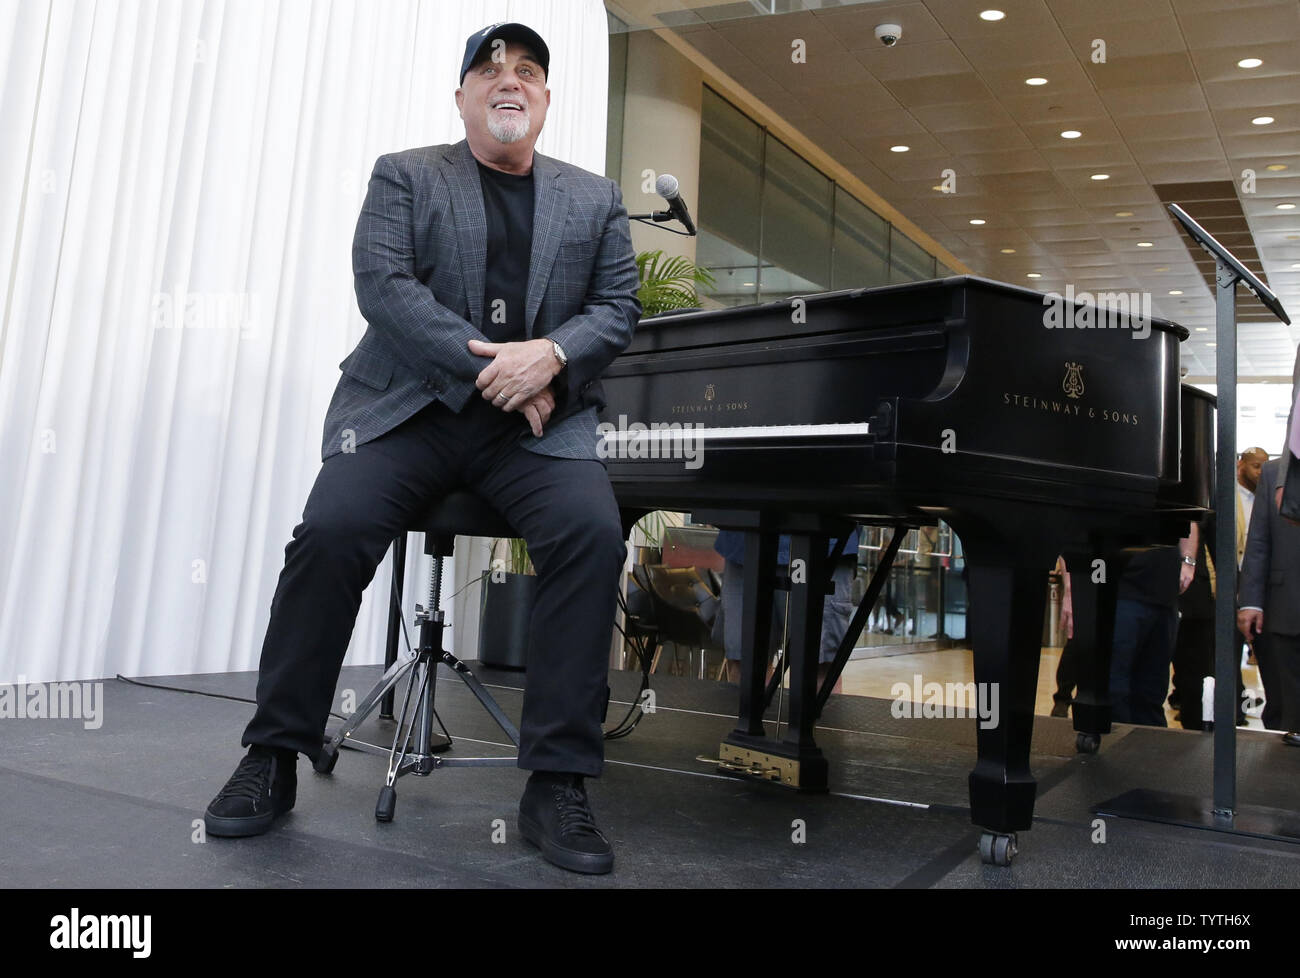 https://c8.alamy.com/comp/TYTH6X/billy-joel-sits-at-a-piano-that-will-be-a-permanent-fixture-at-msg-after-a-press-conference-when-the-madison-square-garden-company-celebrates-billy-joels-unprecedented-achievement-of-100-lifetime-performances-at-madison-square-garden-in-new-york-city-on-july-18-2018-as-part-of-the-press-conference-msg-made-an-announcement-about-a-permanent-display-that-will-serve-as-a-tribute-to-joels-legacy-joels-100th-lifetime-performance-comes-40-years-after-his-first-msg-performance-on-december-14-1978-and-just-four-and-a-half-years-after-he-began-his-legendary-residency-joel-currently-holds-both-TYTH6X.jpg